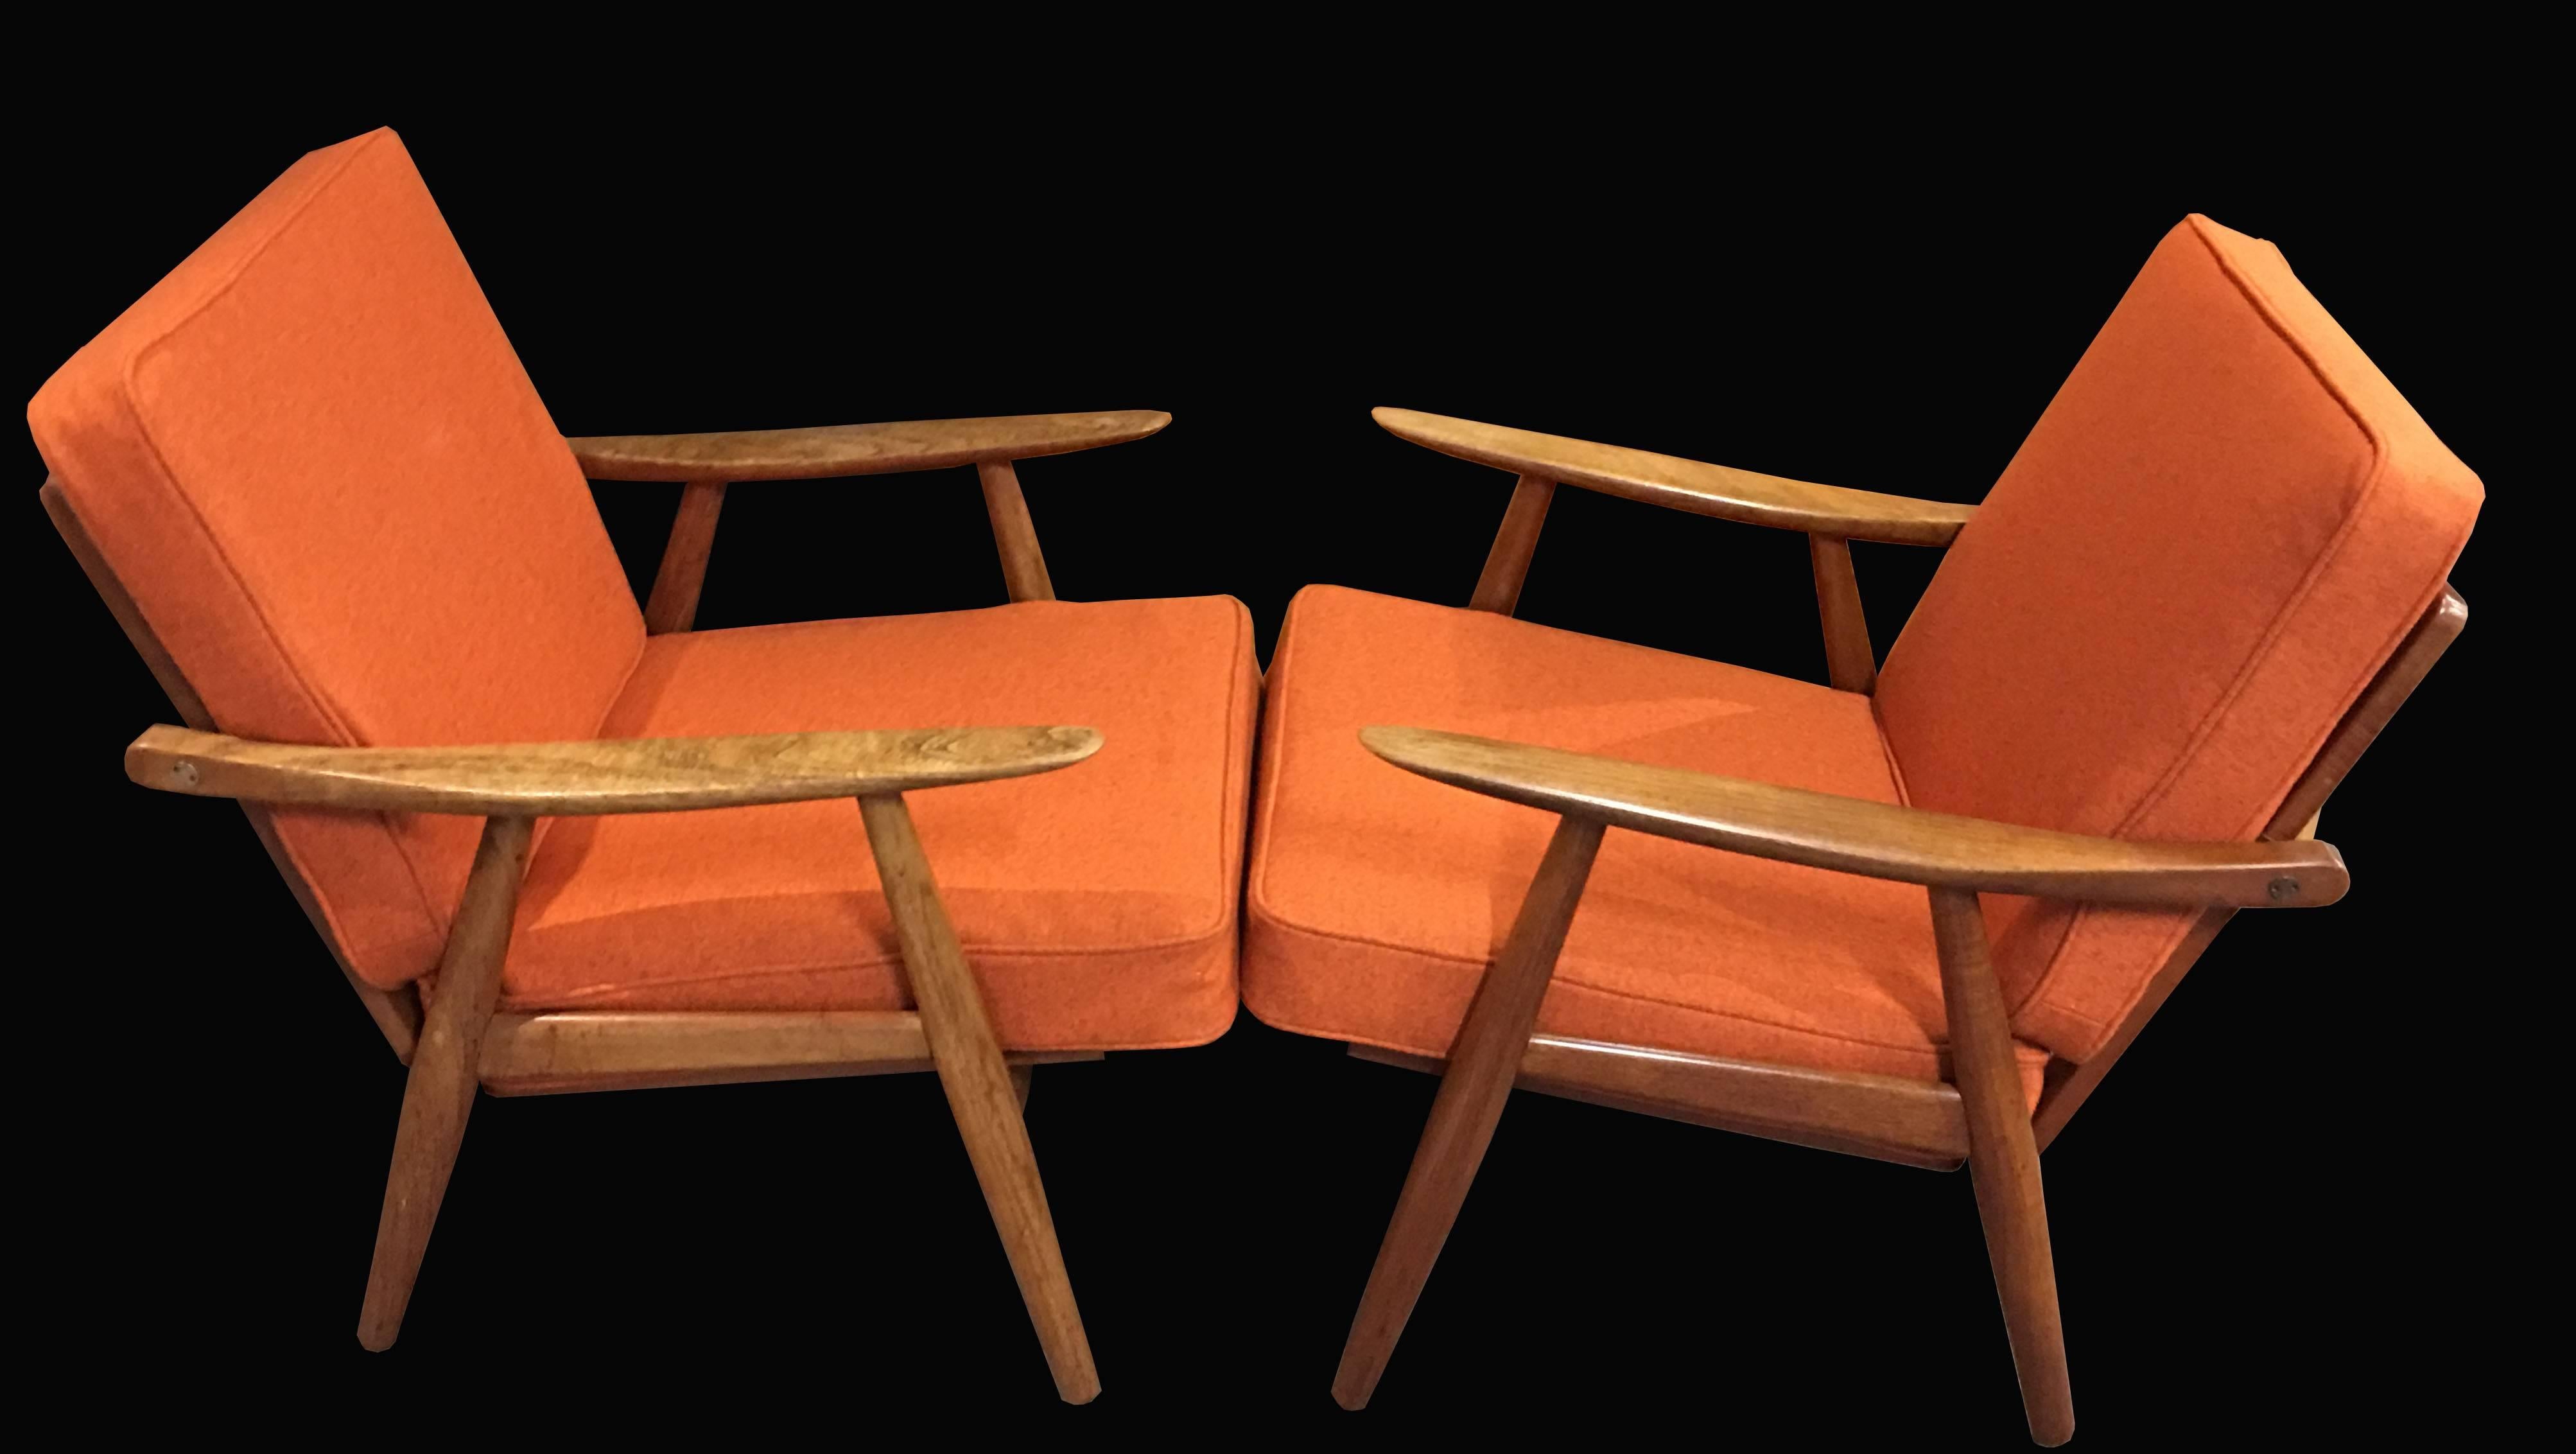 A very good original pair of these scarce model lounge chairs by Wegner, the frames in very good condition with a nice patina, new webbing and fresh new cushion covers in orange flecked wool fabric.